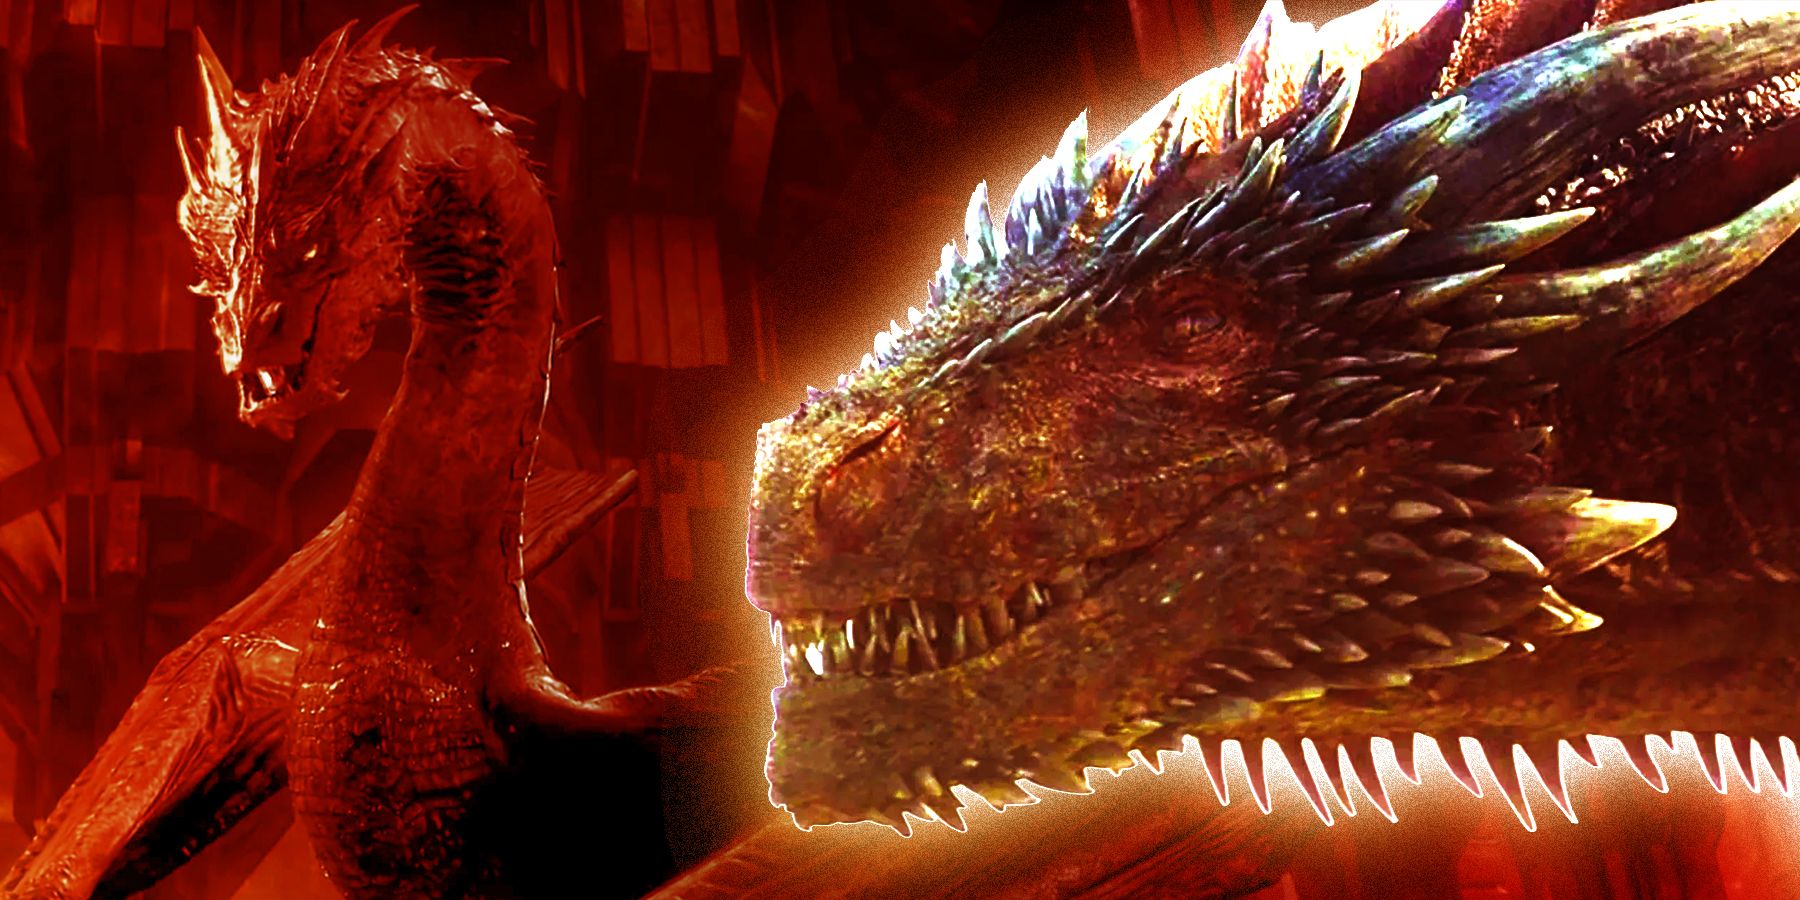 Lord of the Rings: Middle-earth Has More Dragons Than Smaug